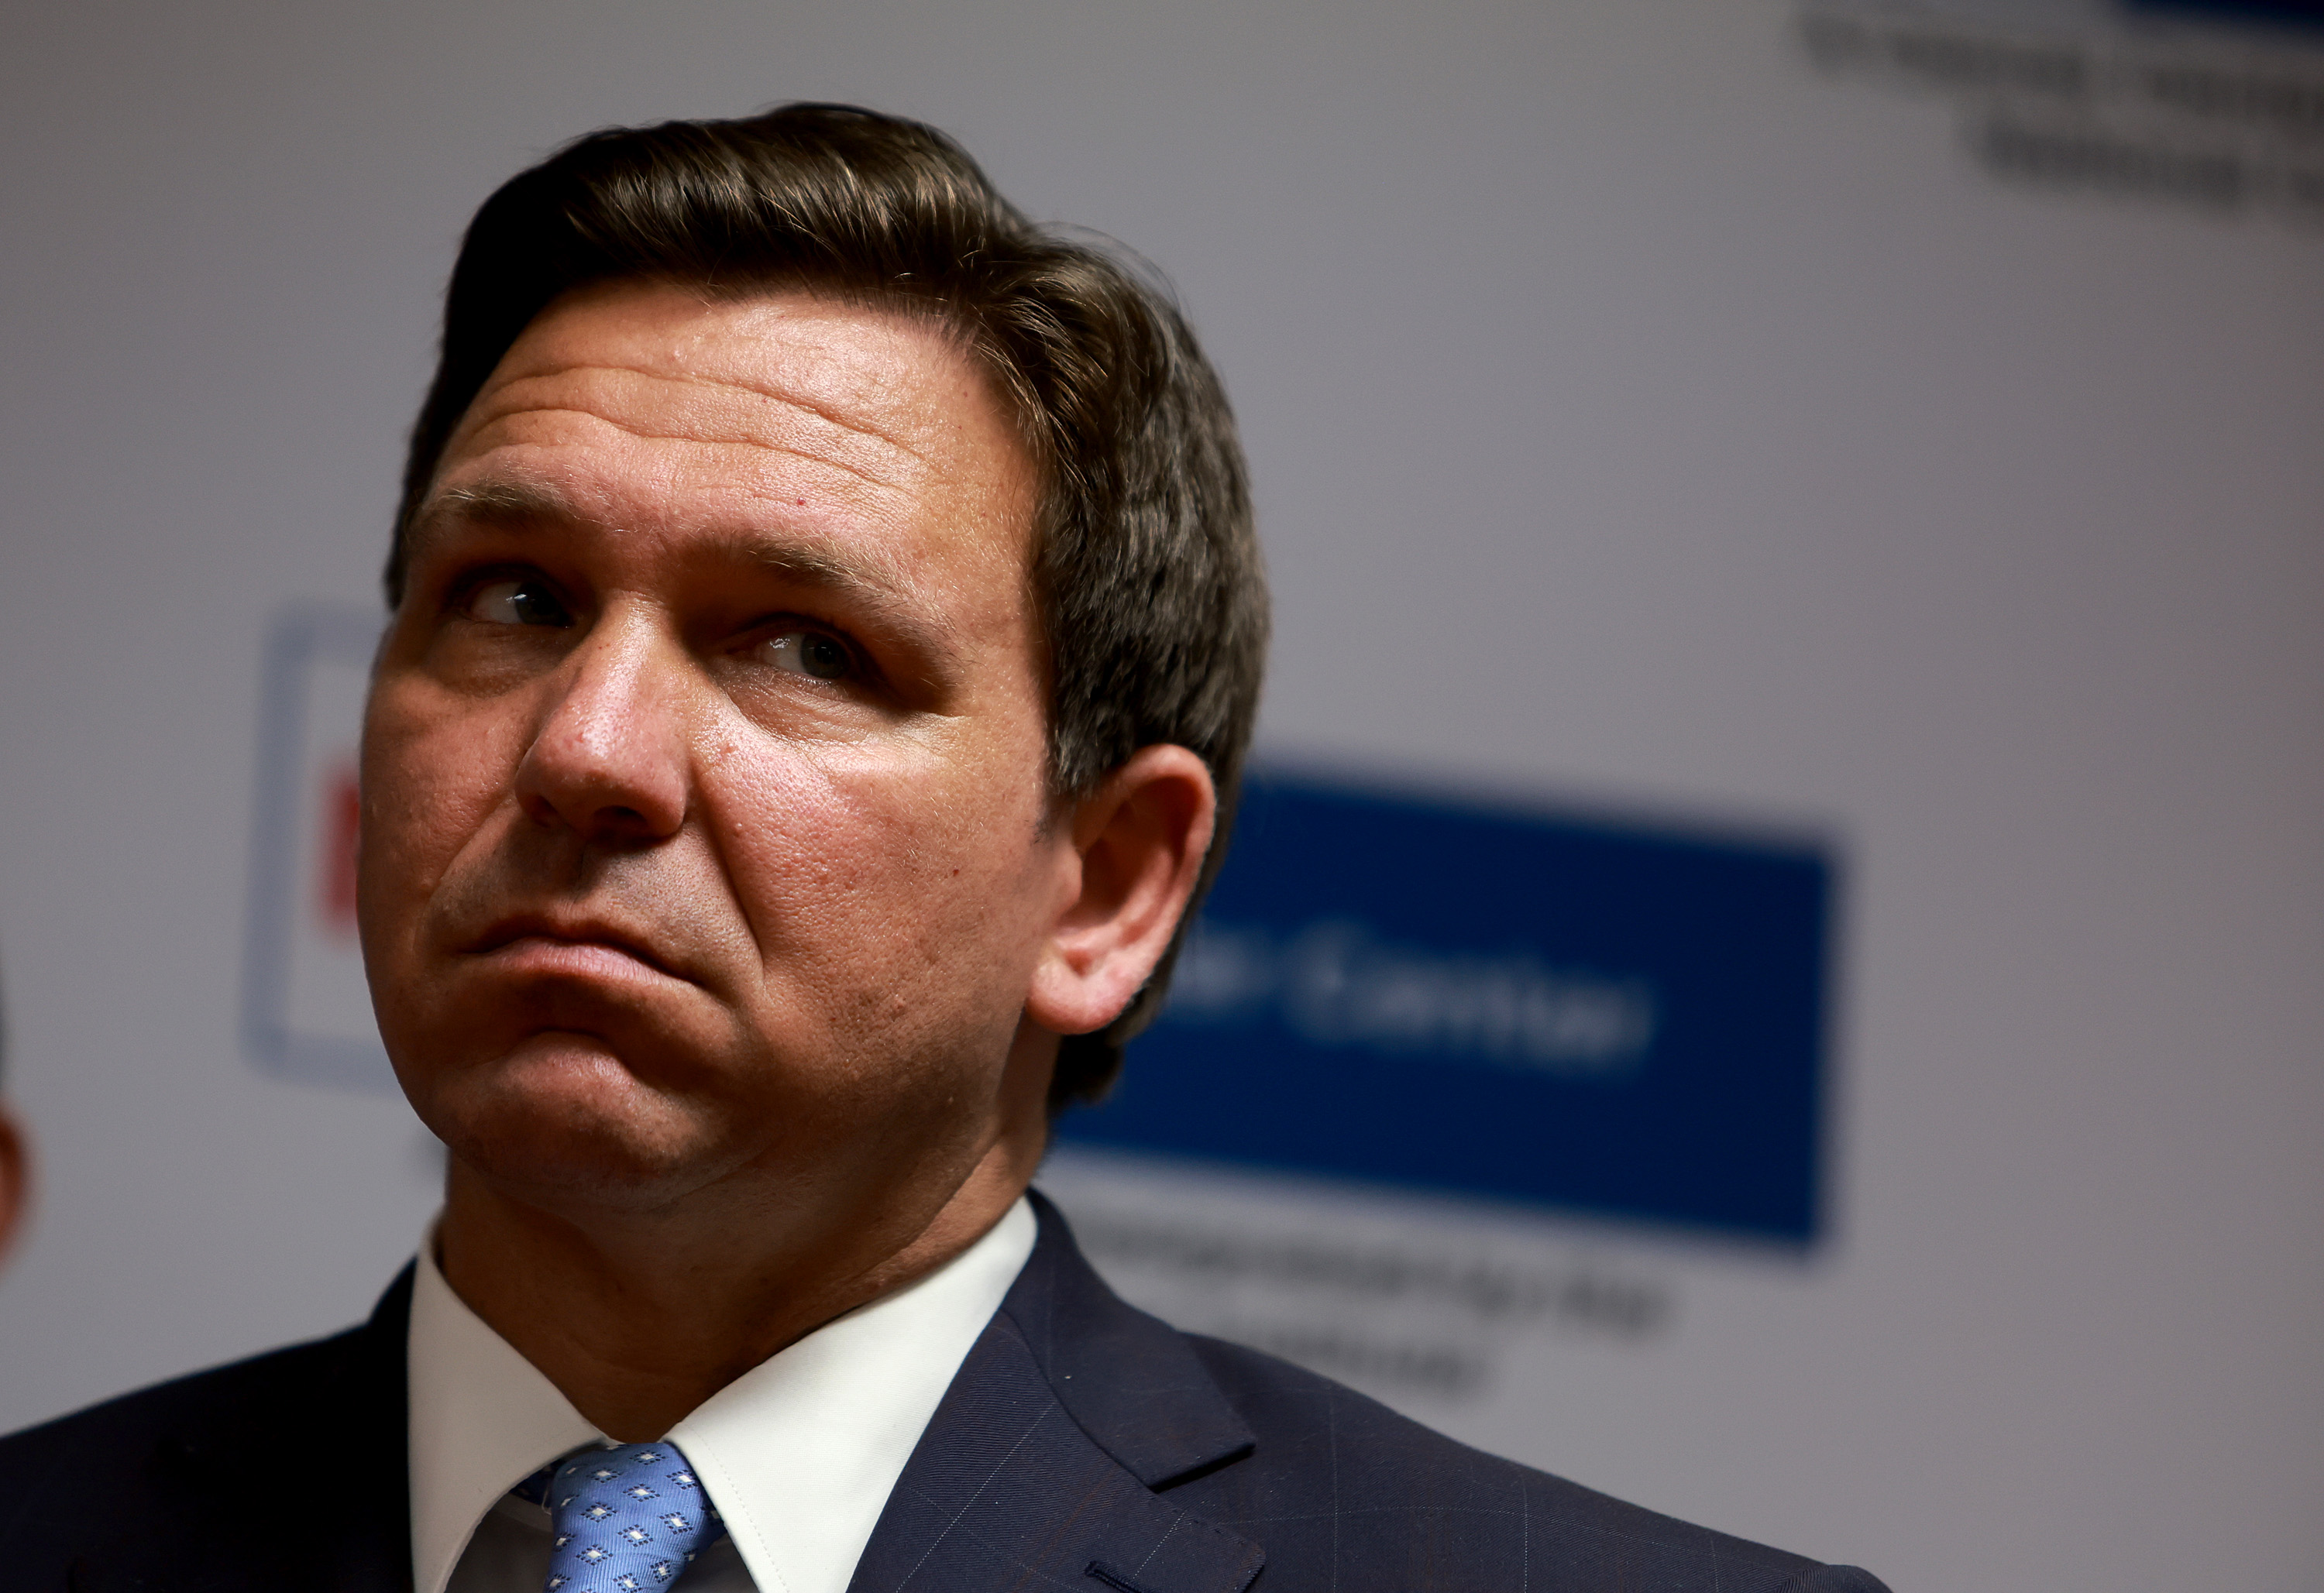 Ron DeSantis Is 'Trump With Substance' in Response to Ian: Former RNC Spox